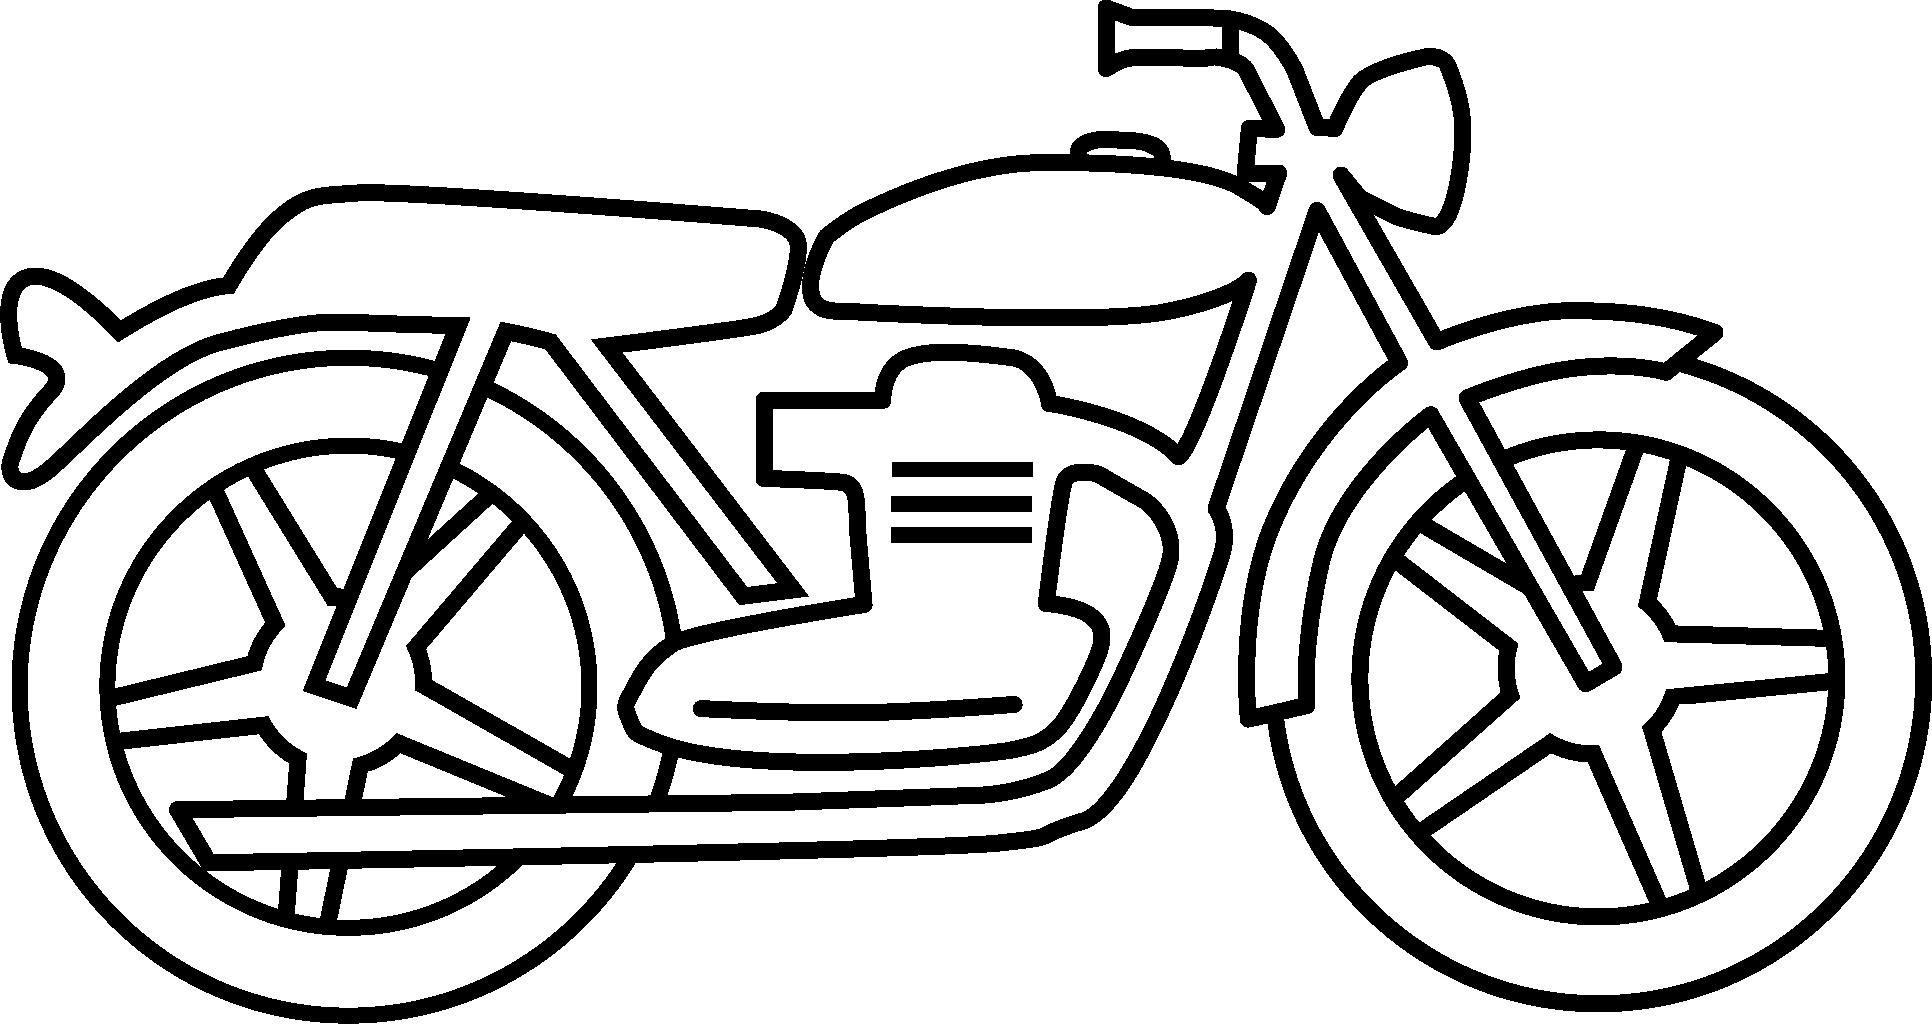 Motorbike Line Drawing - ClipArt Best